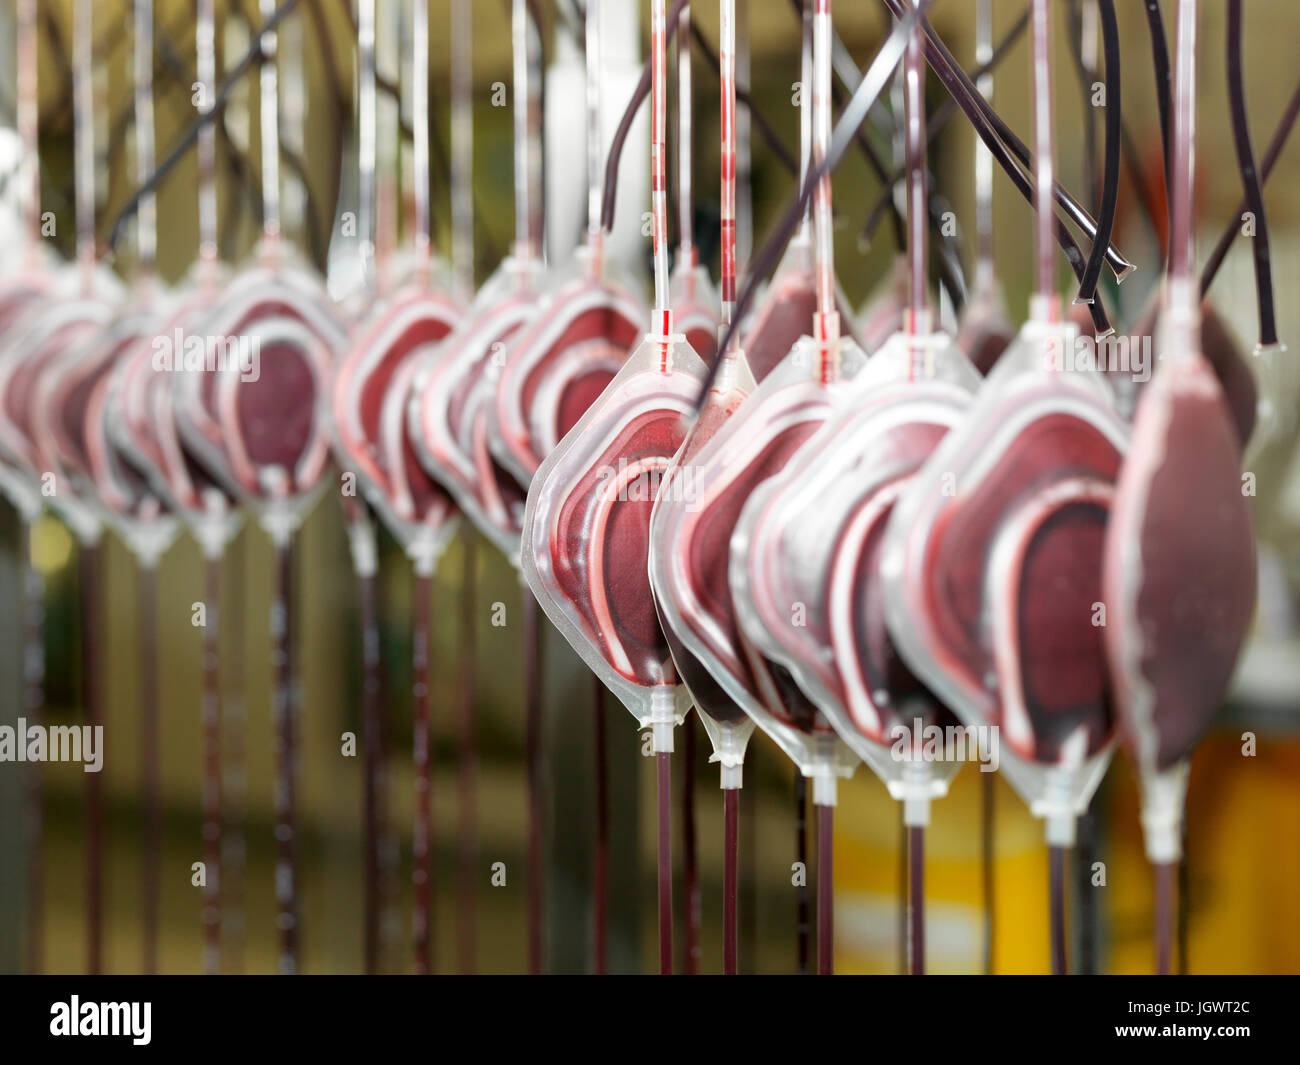 Bags of donated blood hanging in processing facility of blood bank Stock Photo